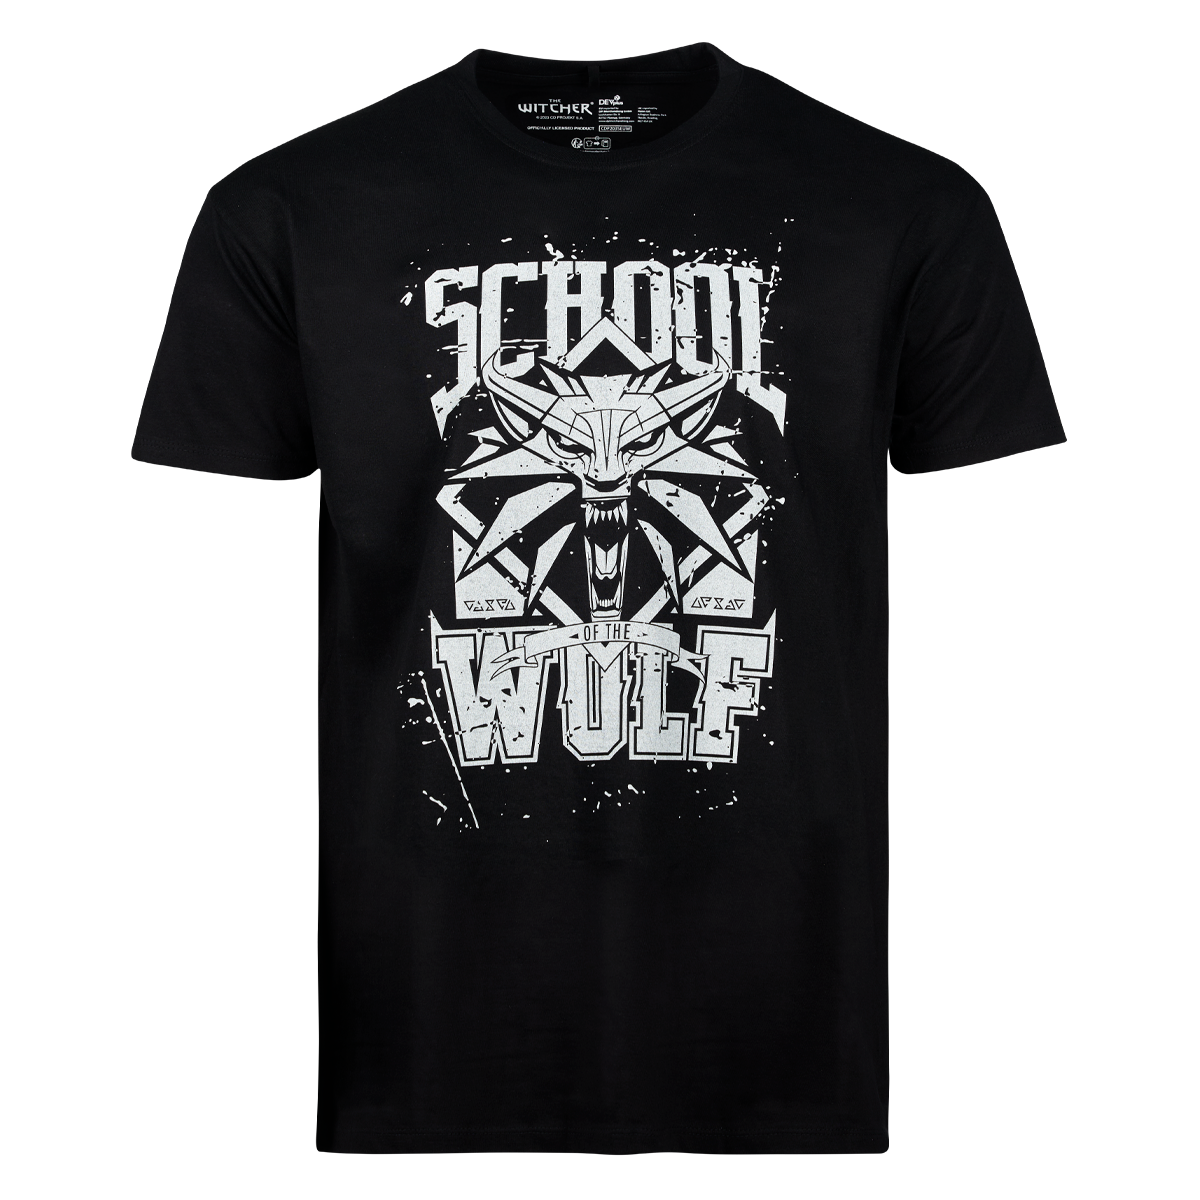 The Witcher T-Shirt "School of the Wolf" Black XL